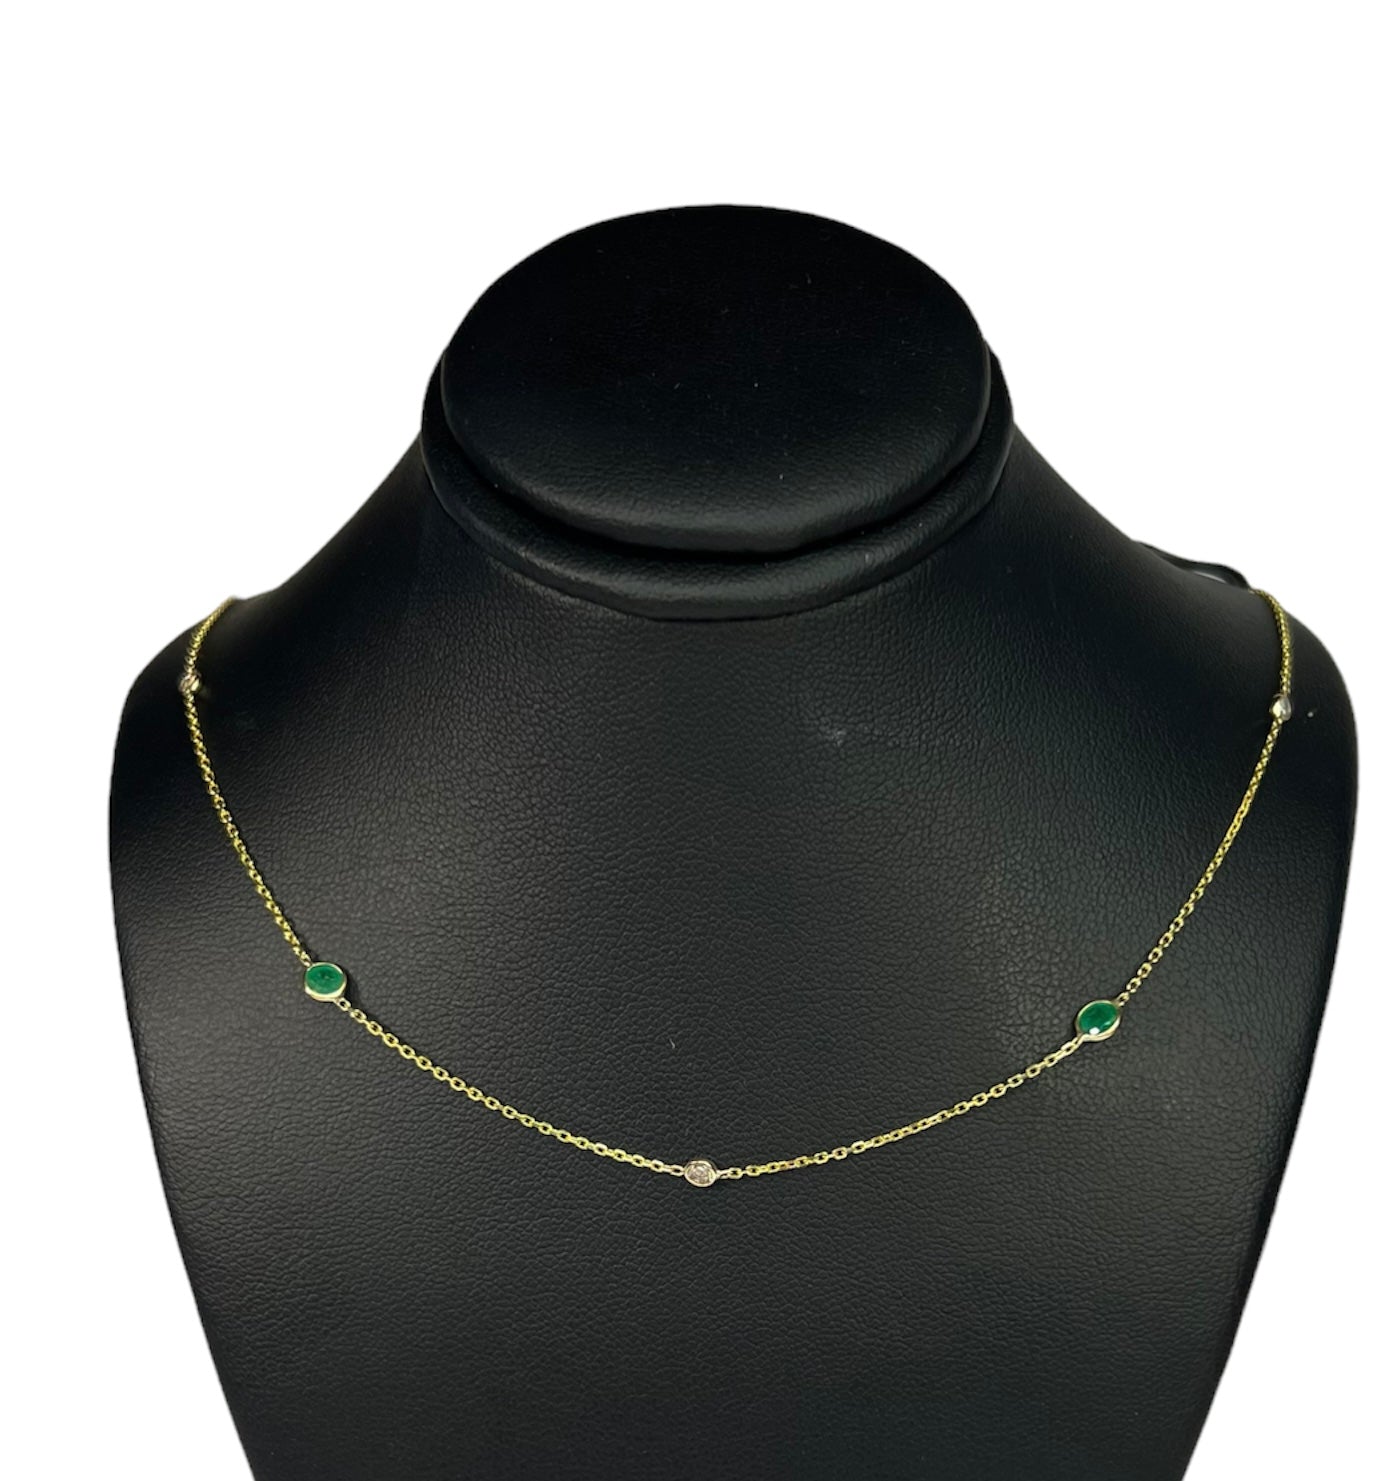 14K Yellow Gold 4 Emerald 3 Diamond by the Yard Necklace 16"